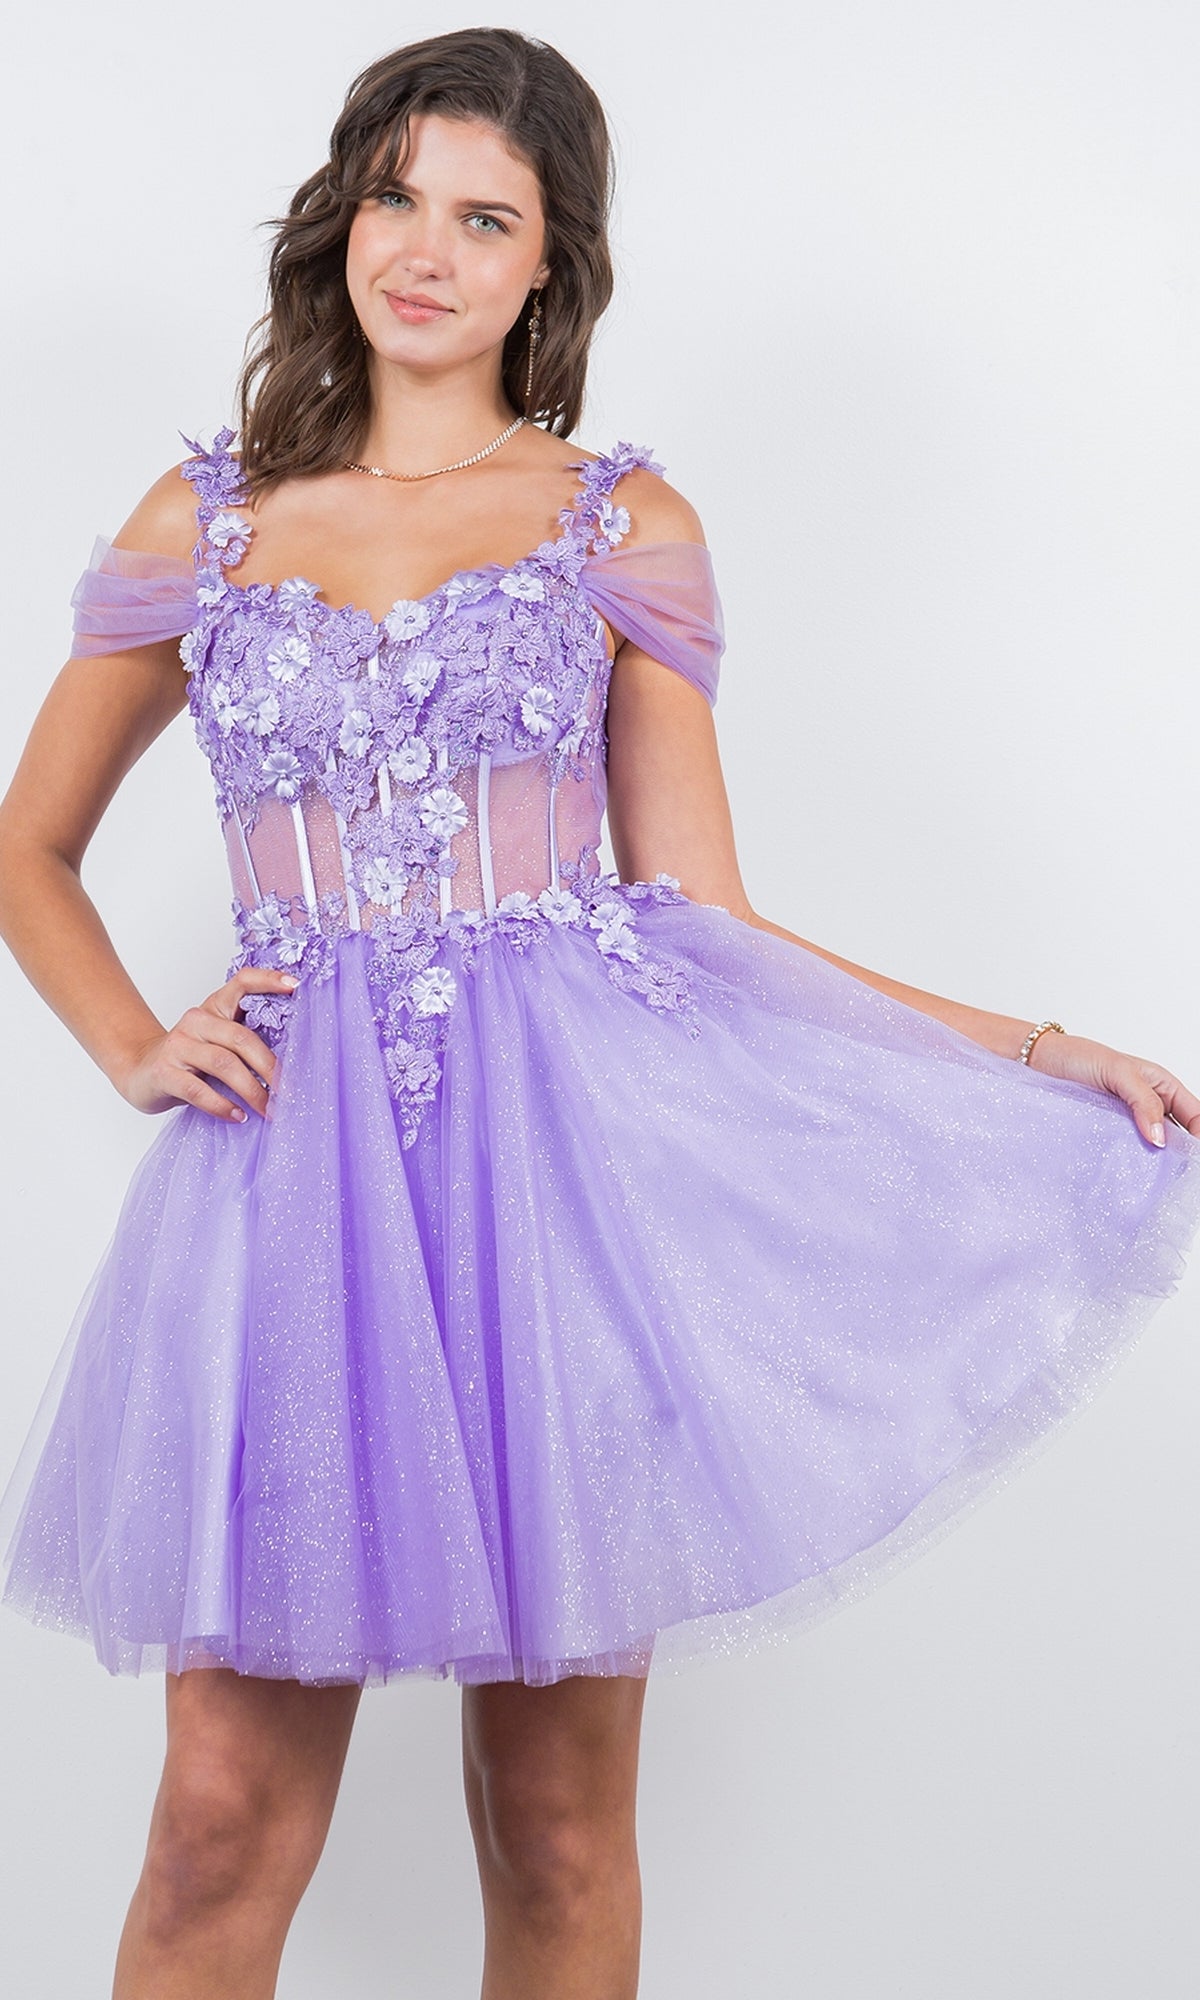 Glitter-Tulle Fit-and-Flare Short Prom Dress 5134J